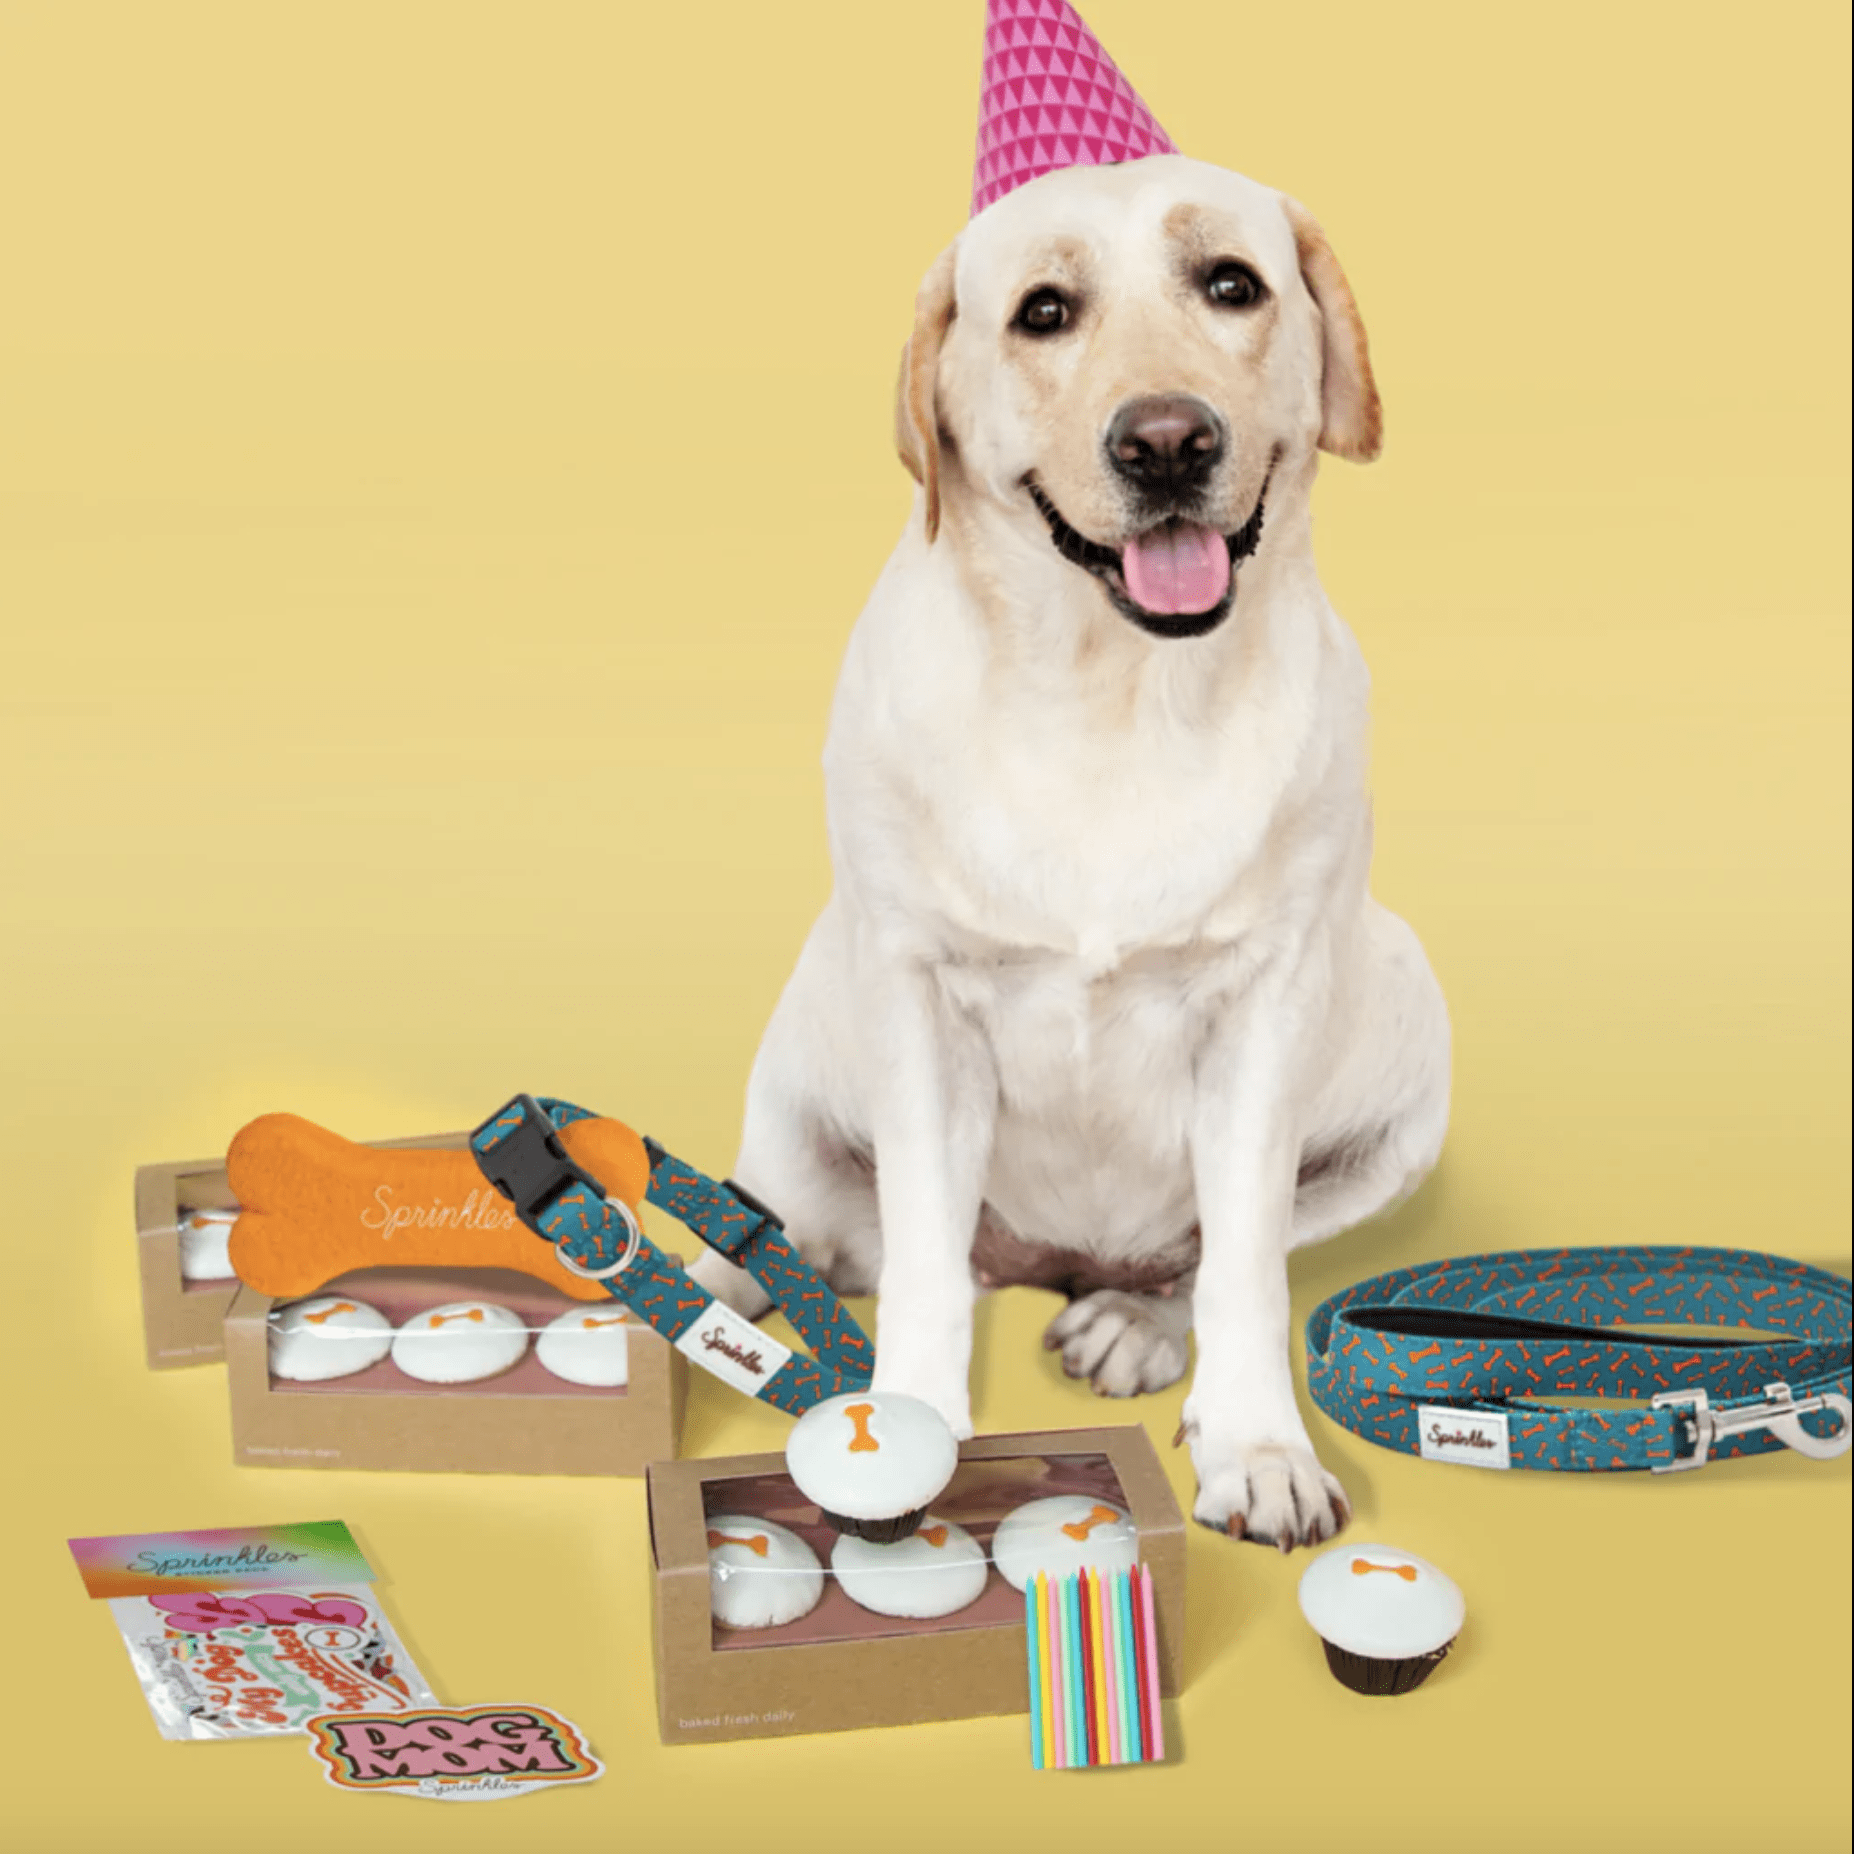 https://www.tasteofhome.com/wp-content/uploads/2022/11/dog-with-spinkles-cupcakes-e1668454731843.png?fit=700%2C700